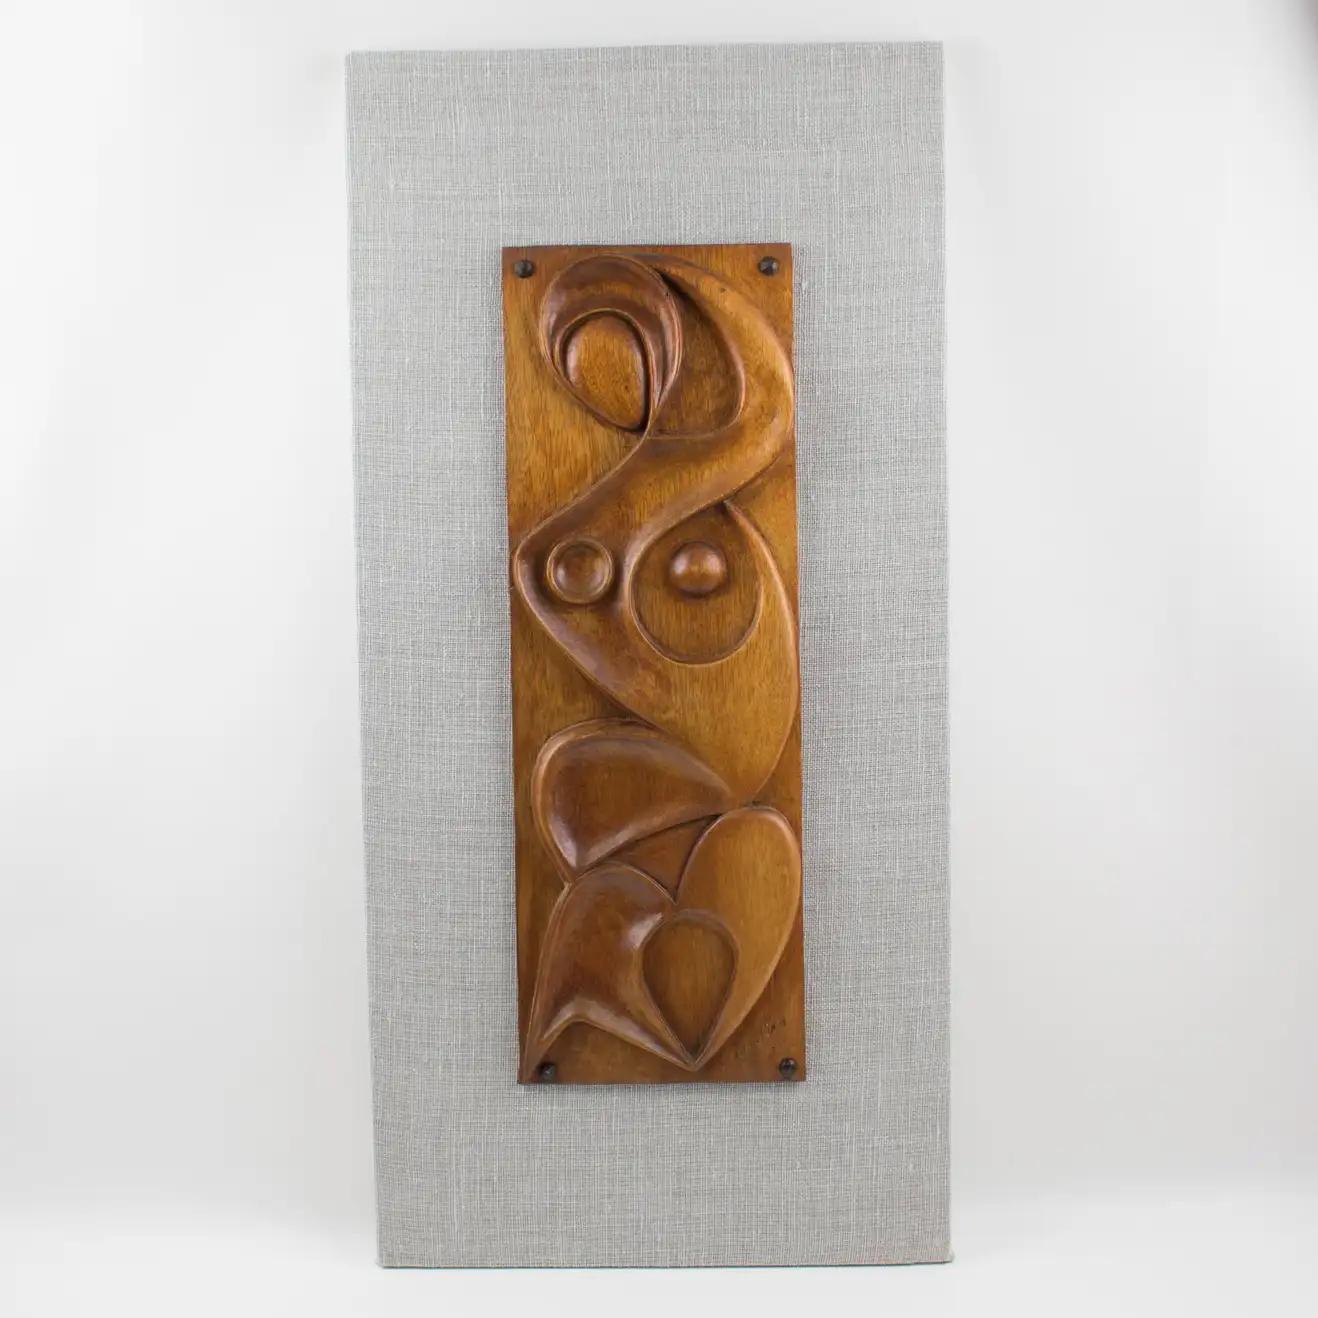 Maxime Tendero Wall-Mounted Abstract Wooden Hand-Carved Art Sculpture Panel 1973 In Excellent Condition For Sale In Atlanta, GA